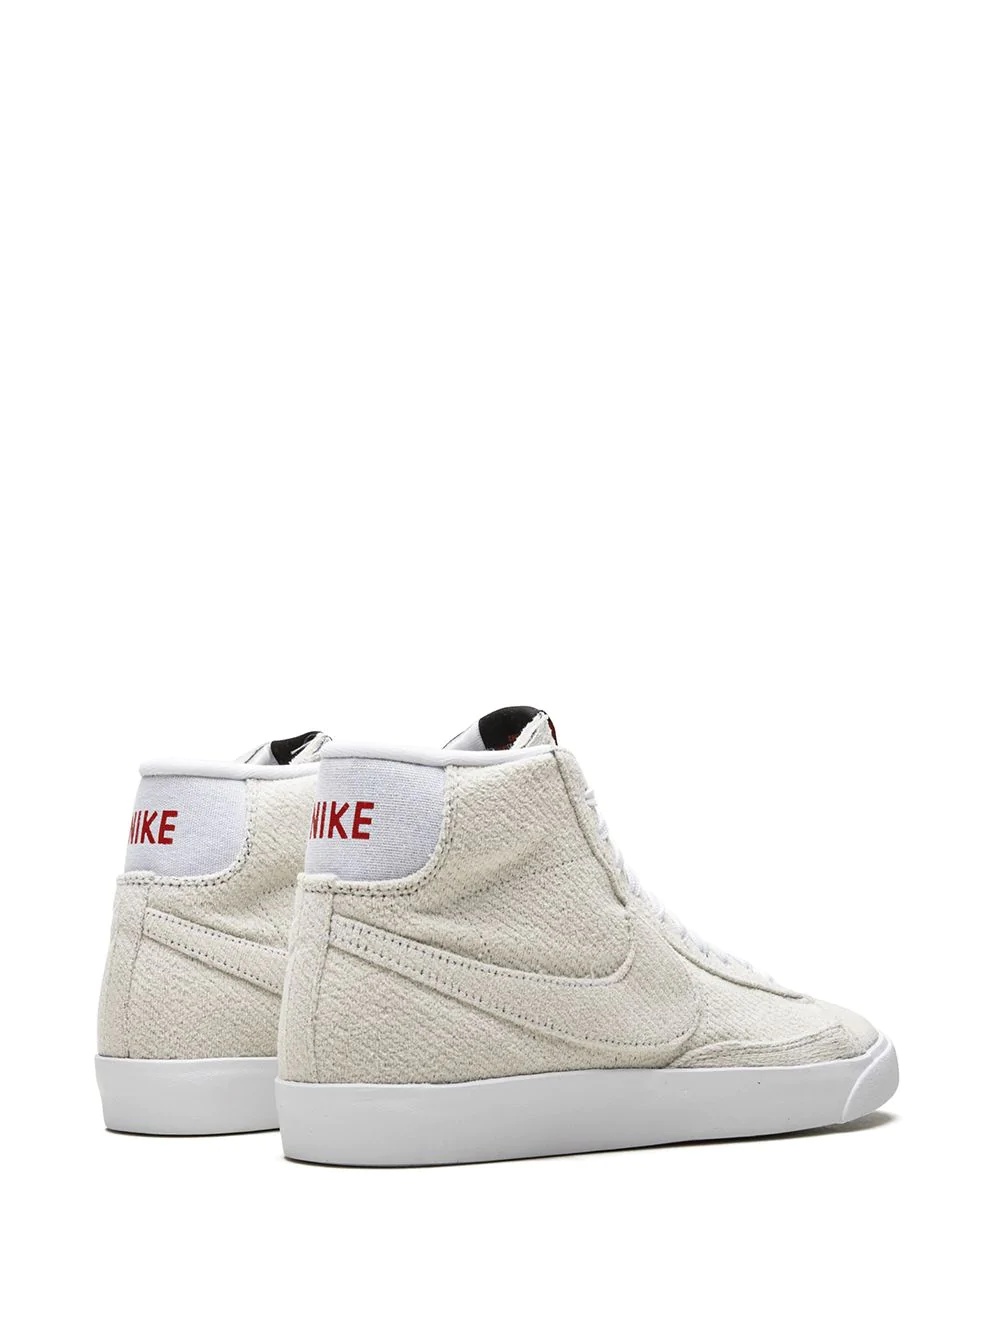 x The Stranger Things Blazer Mid QS UD sneakers - 3